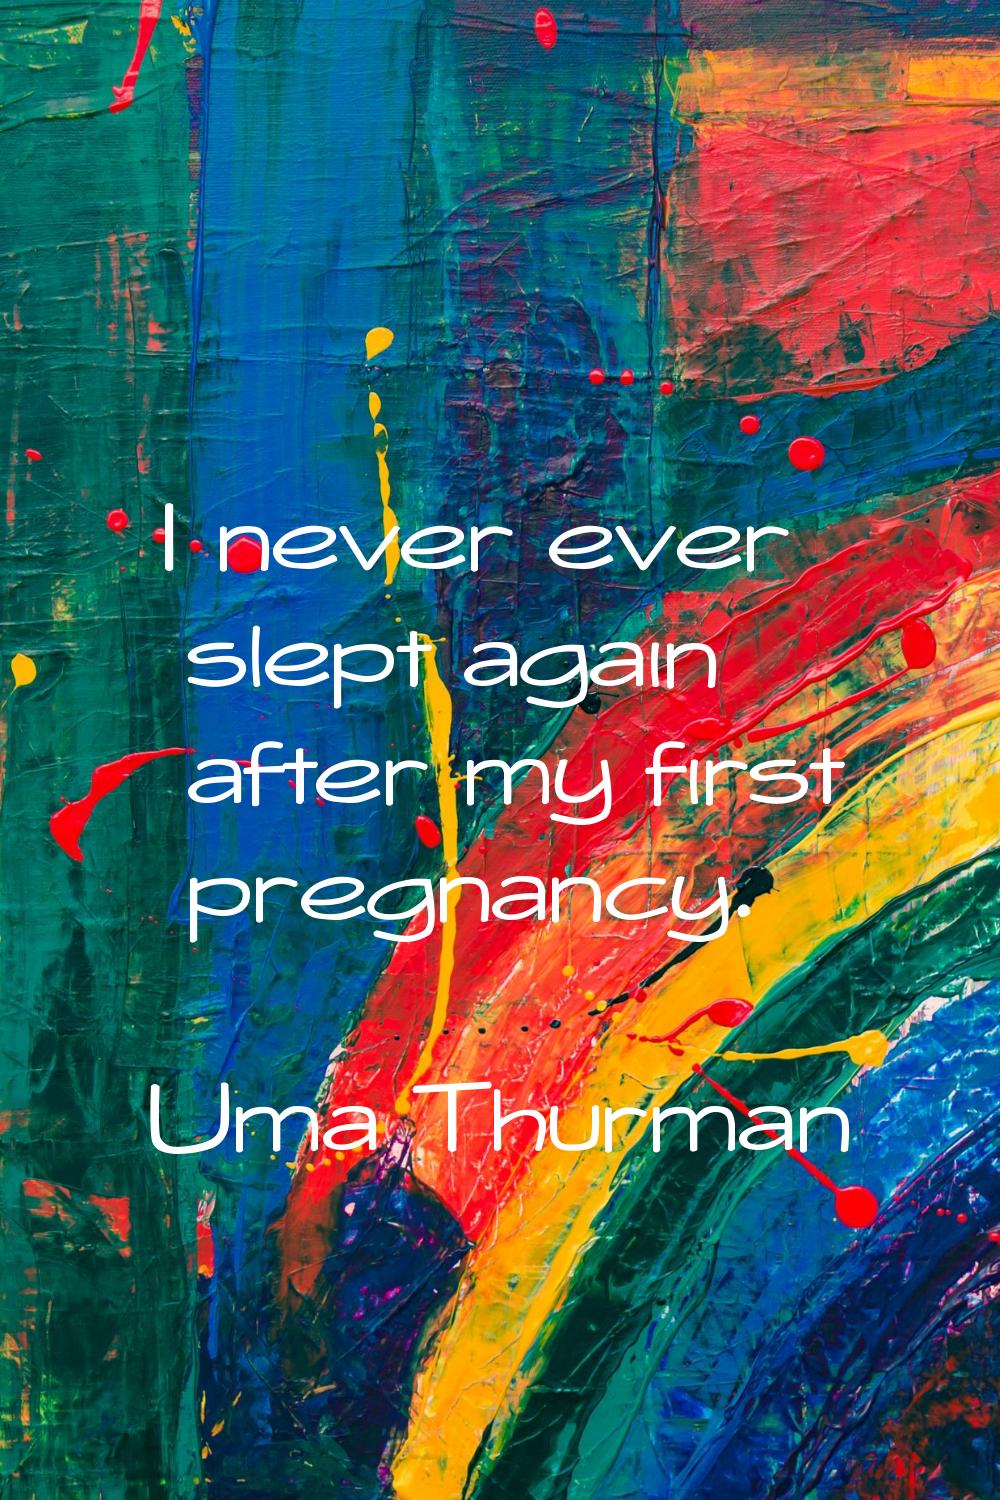 I never ever slept again after my first pregnancy.